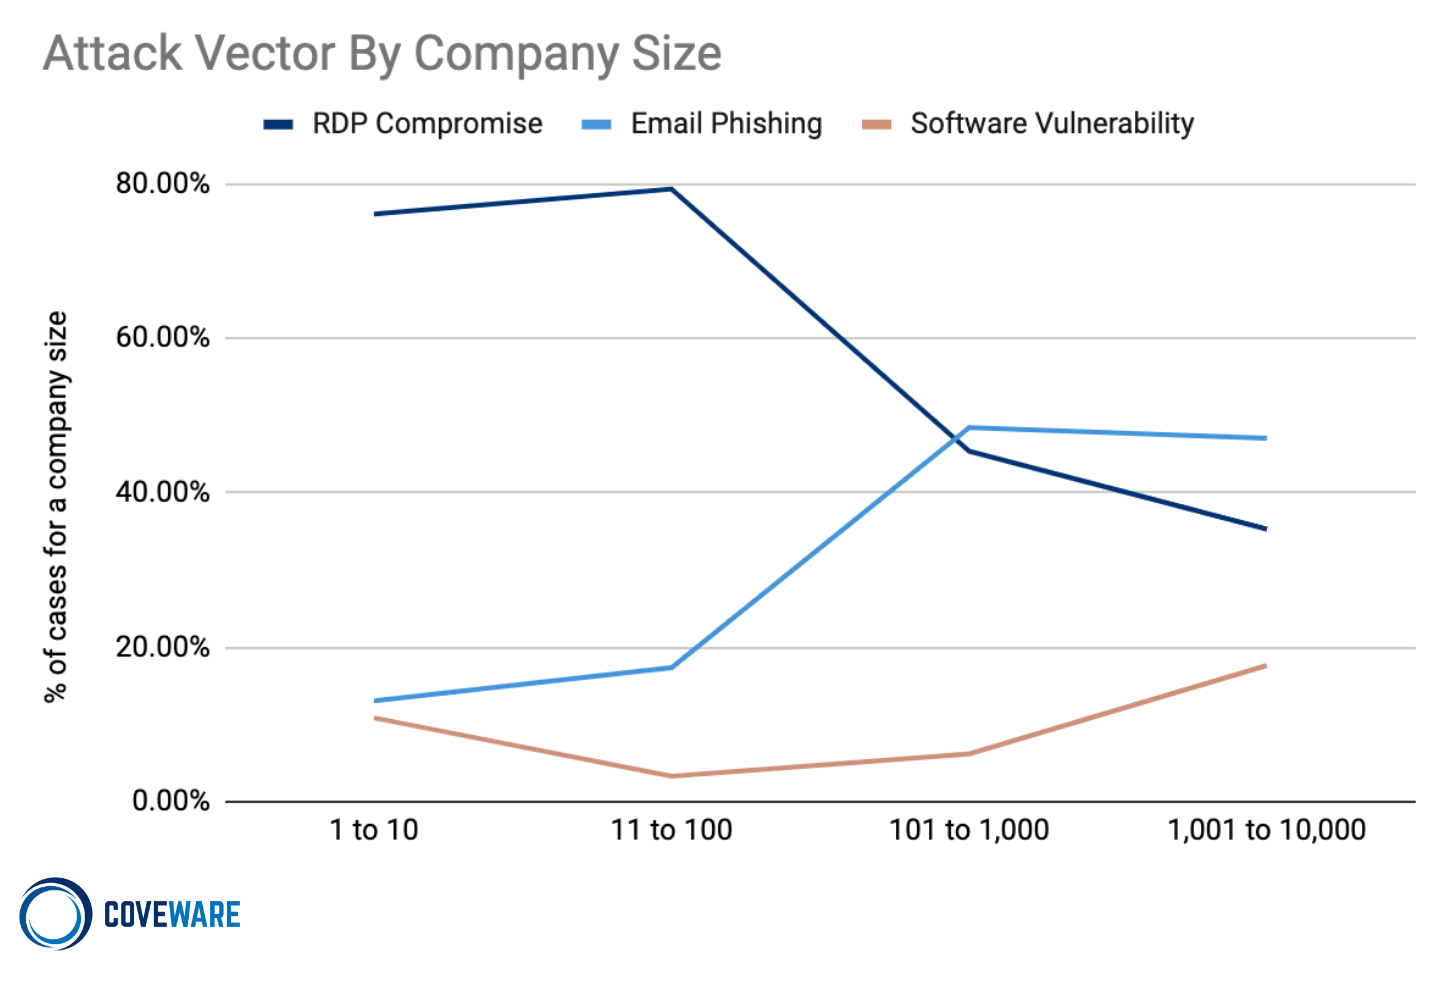 Attack Vector by Company Size